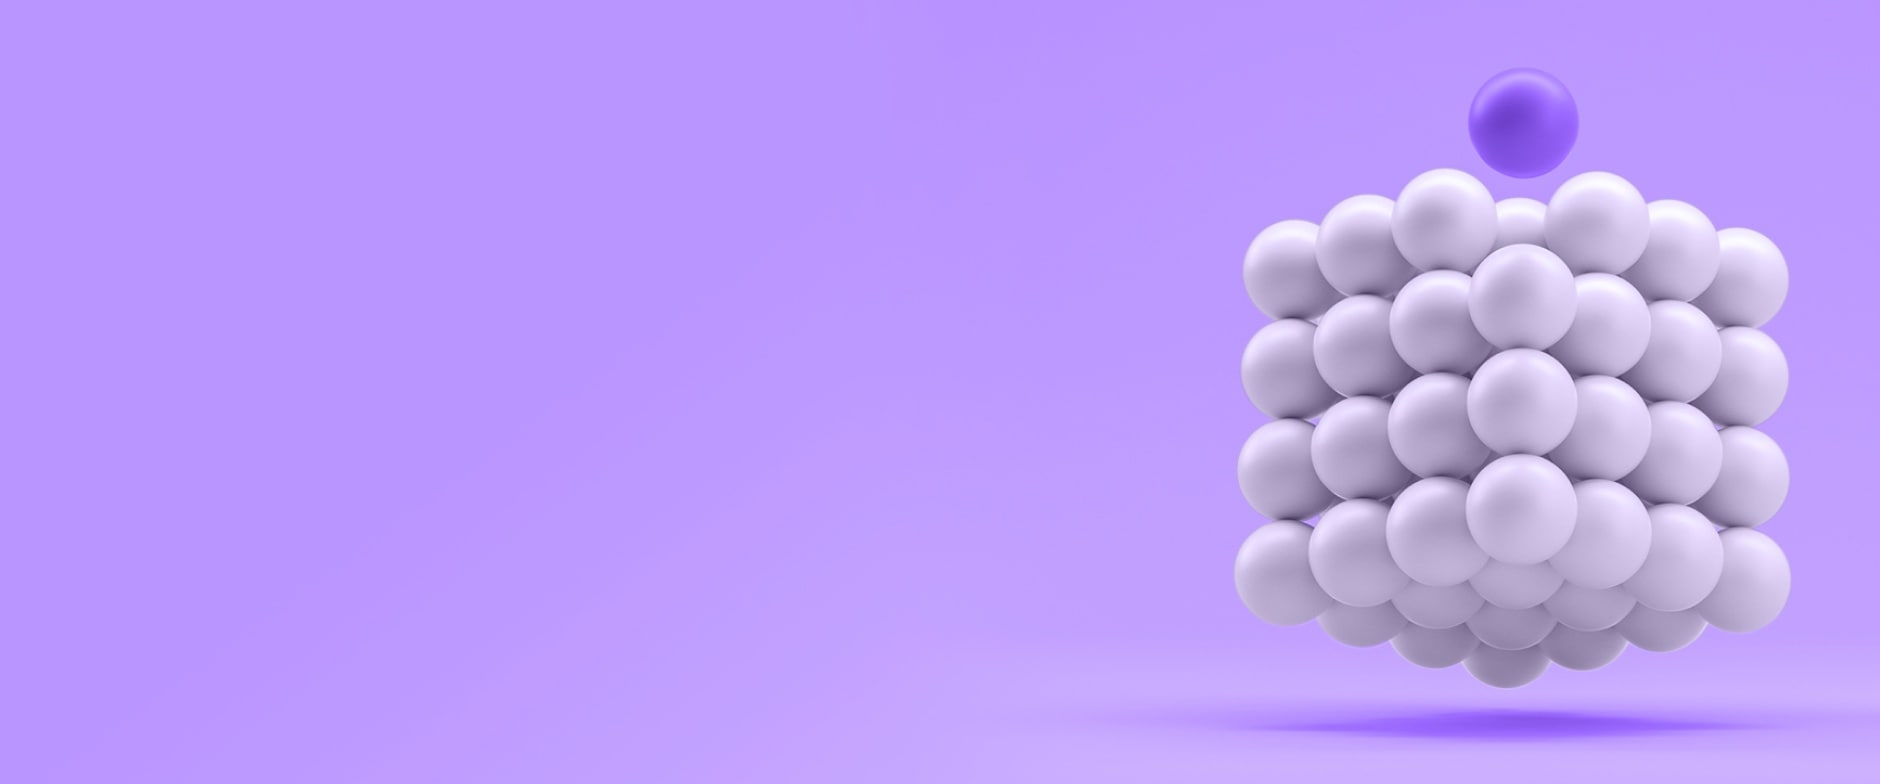 Purple Background with White Balls